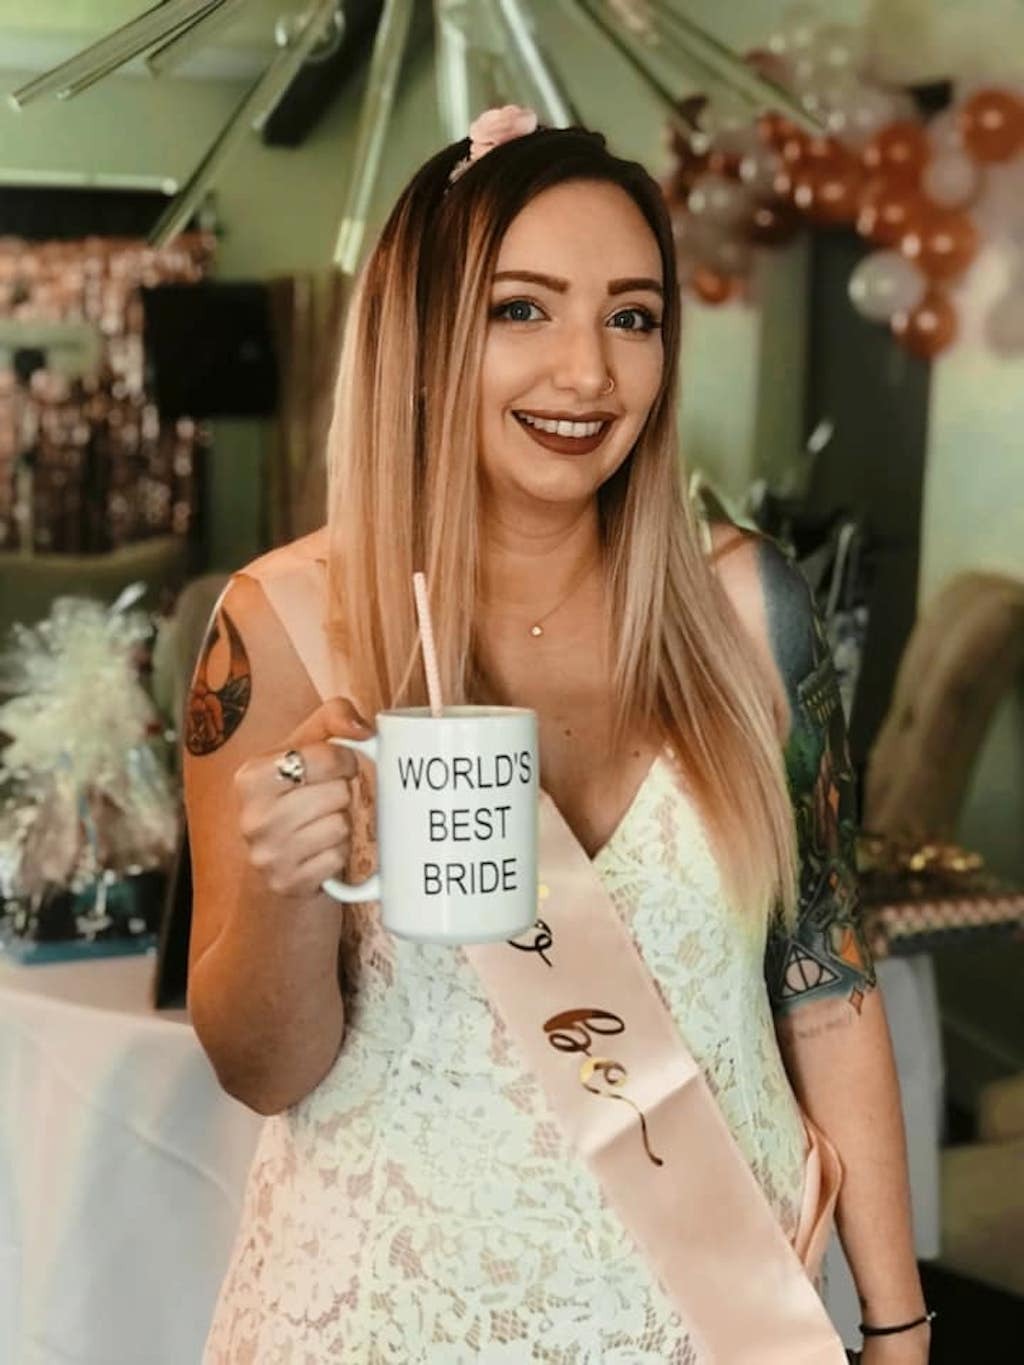 Kayleigh Brown's Office-themed bridal shower goes viral